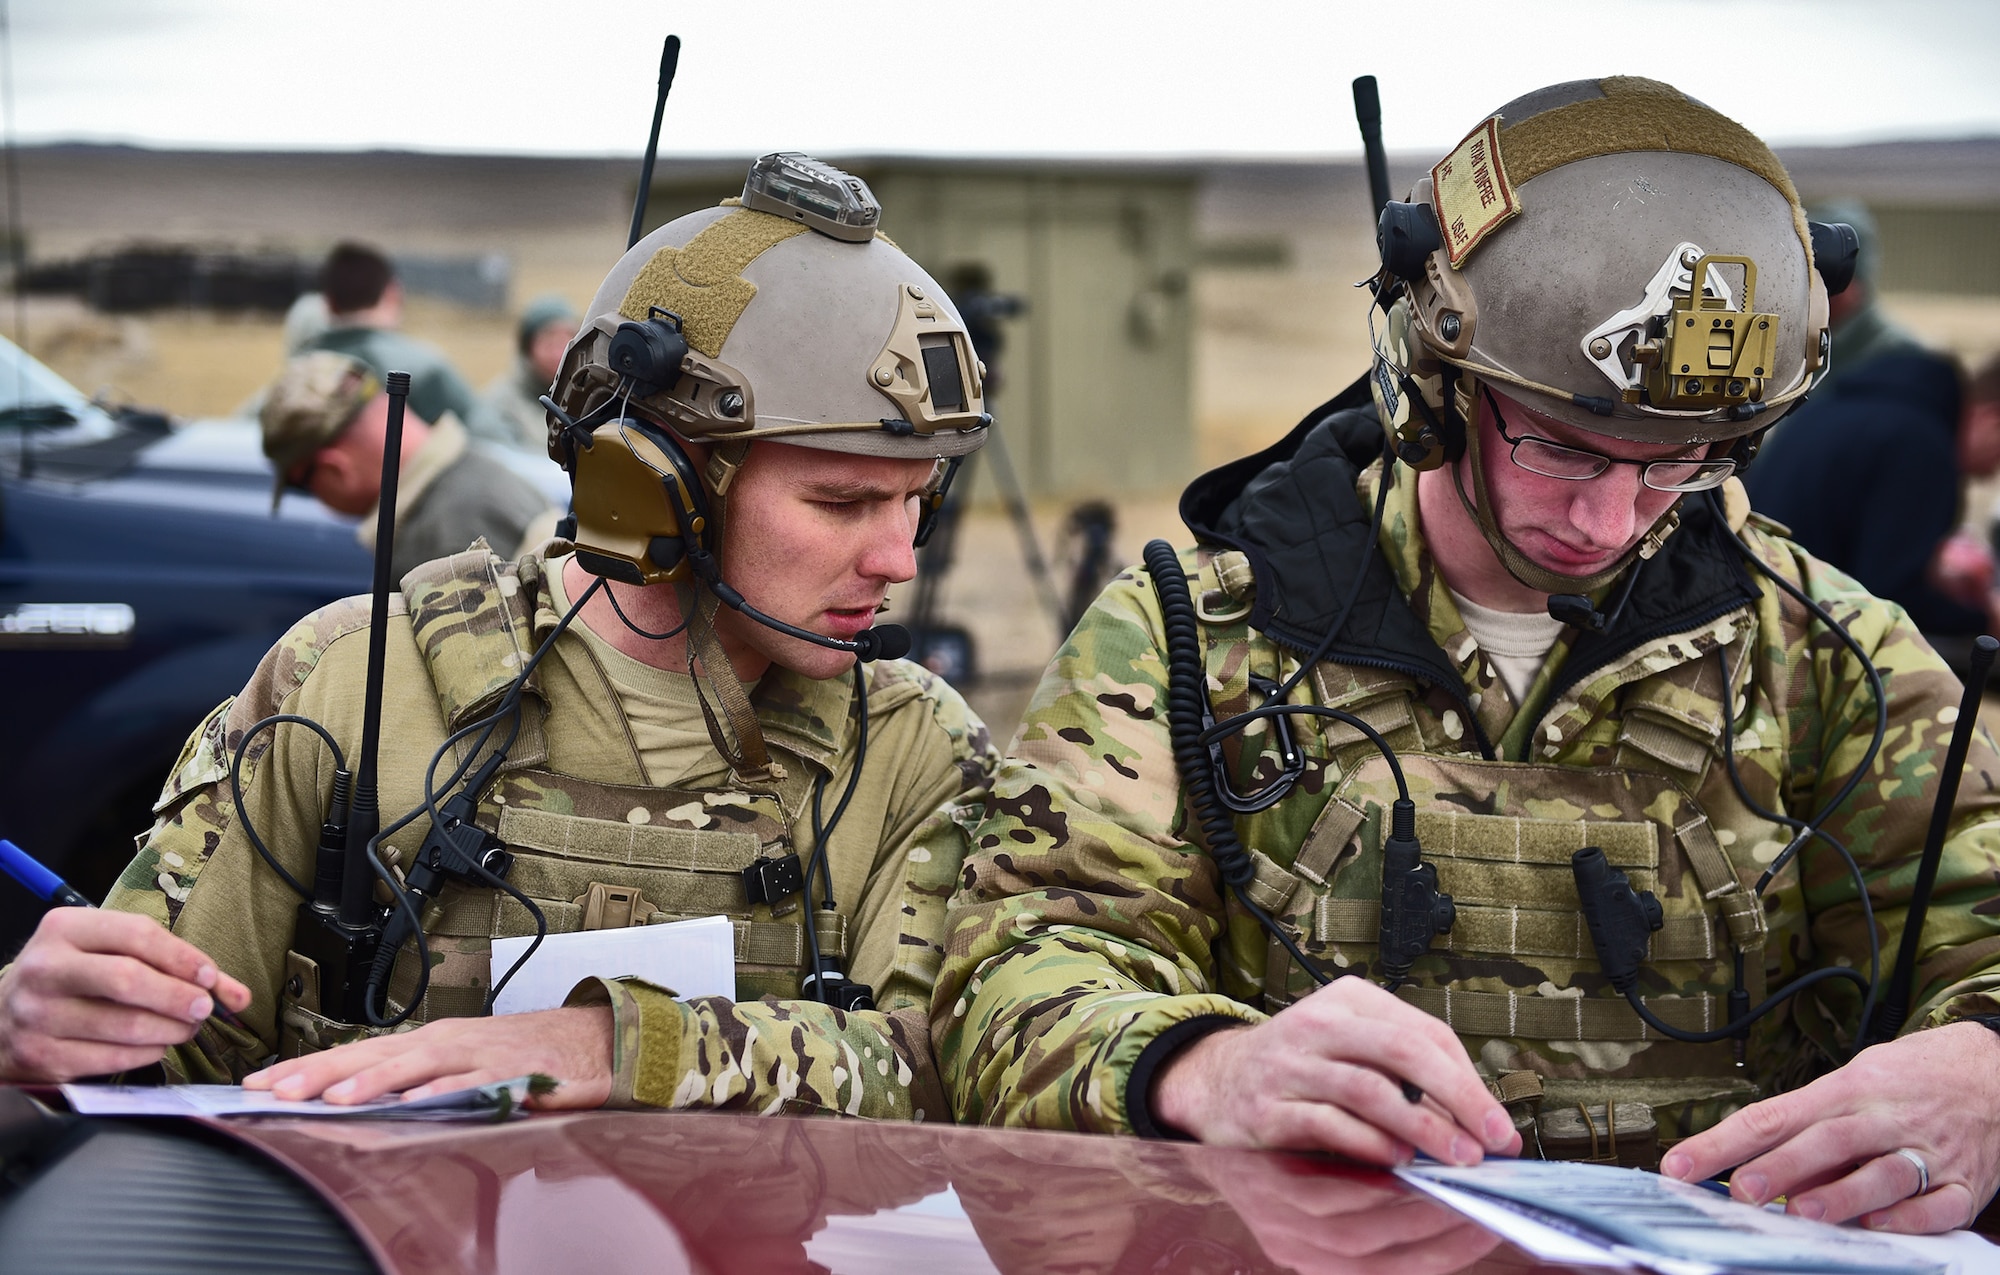 Airman 1st Class Ethan Gossett and Senior Airman Ryan Winfree, joint terminal attack controllers assigned to the 5th Air Support Operations Squadron, Joint Base Lewis-McChord, Wash., double check their numbers before a B-1 flyover near Belle Fourche, S.D., Nov. 16, 2016. JTAC members direct the action of combat aircraft engaged in close-air-support and other offensive air operations from a forward position. (U.S. Air Force photo by Airman 1st Class James L. Miller) 